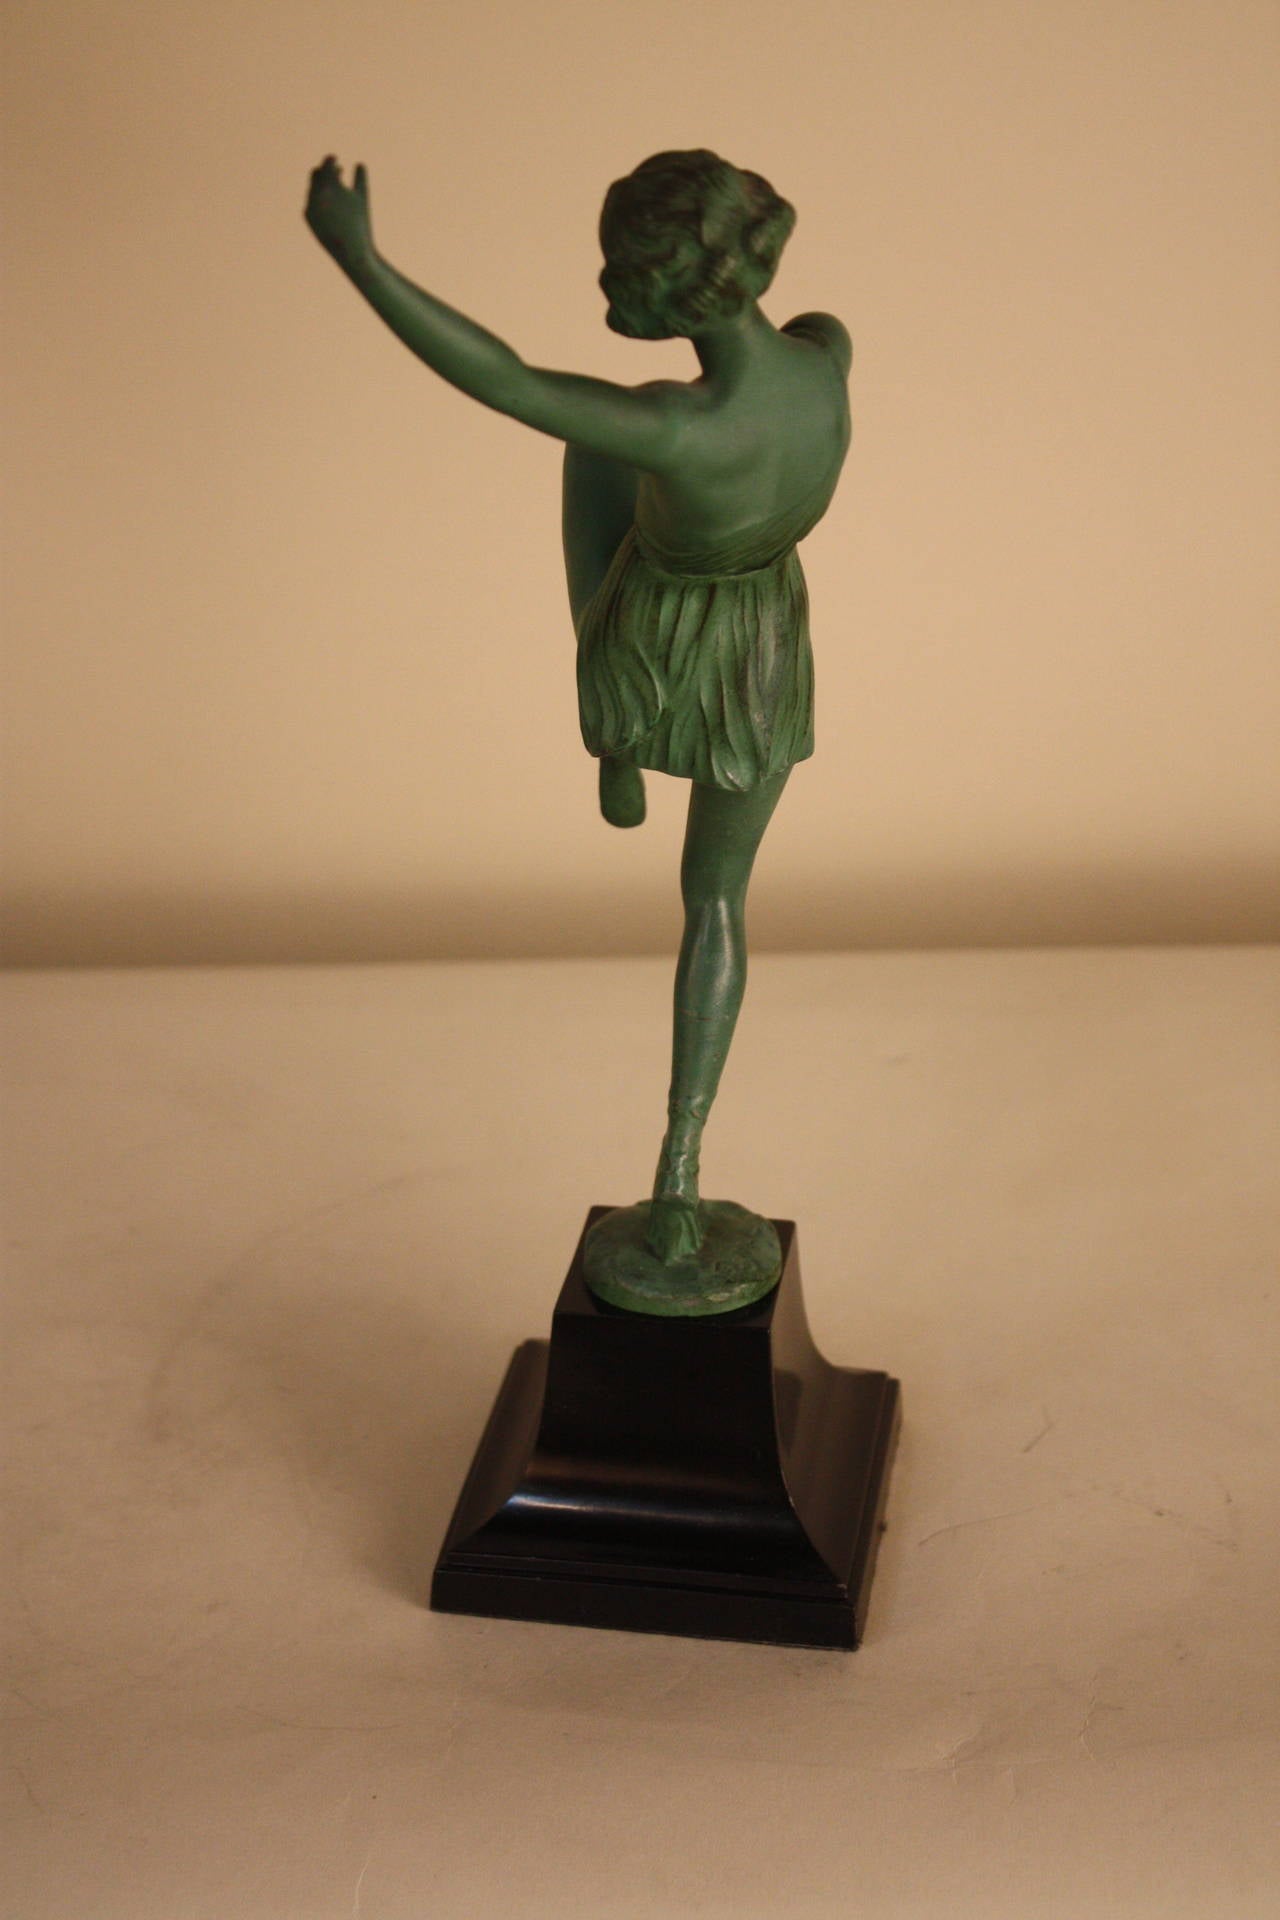 Painted Art Deco Hoop Dancer Statue by Briand